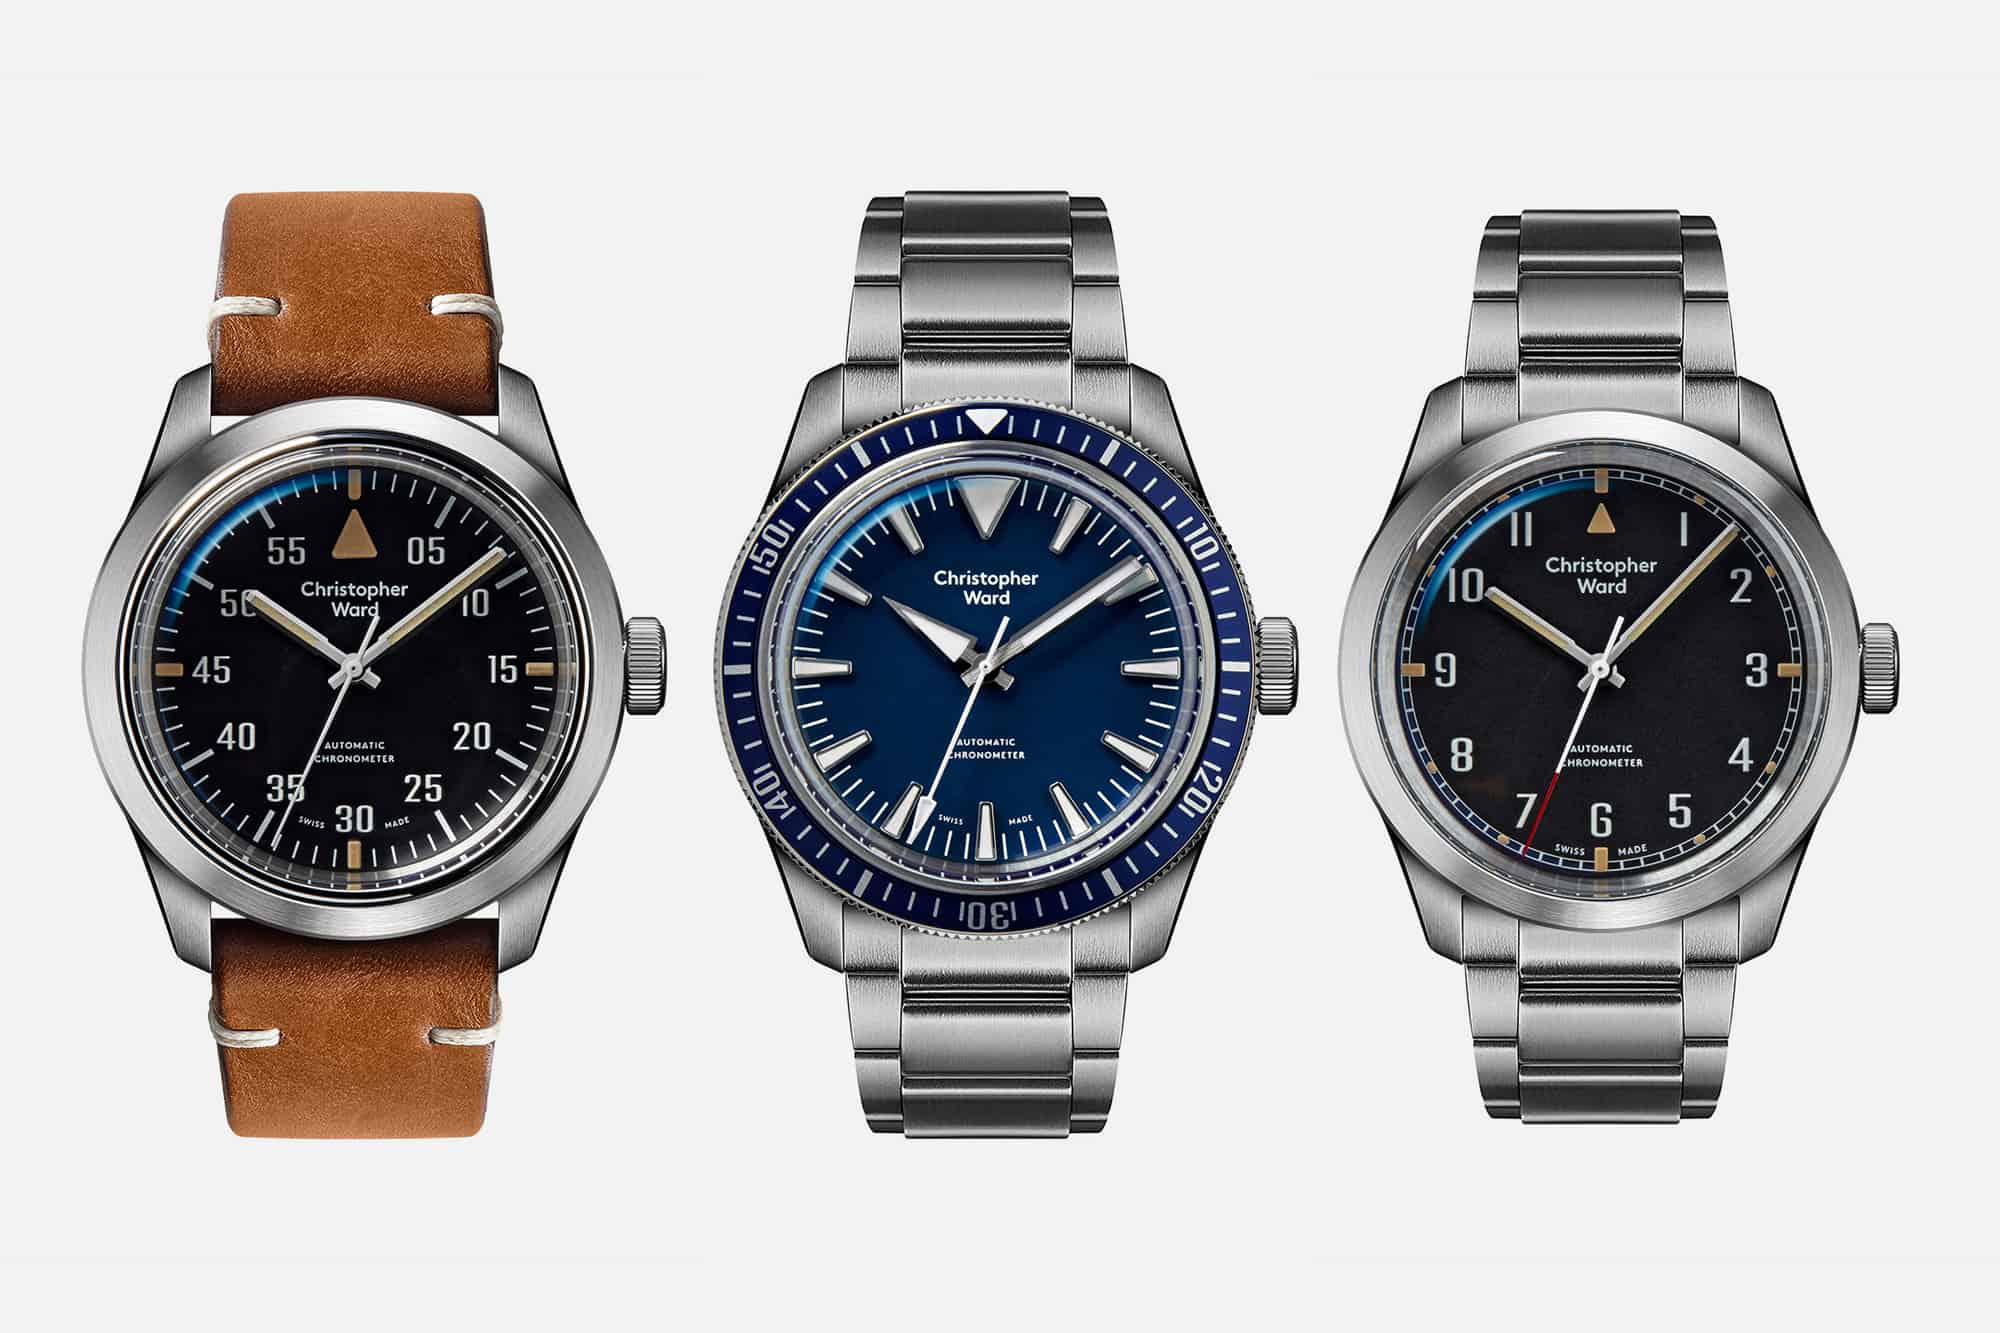 Introducing the Christopher Ward Military Collection